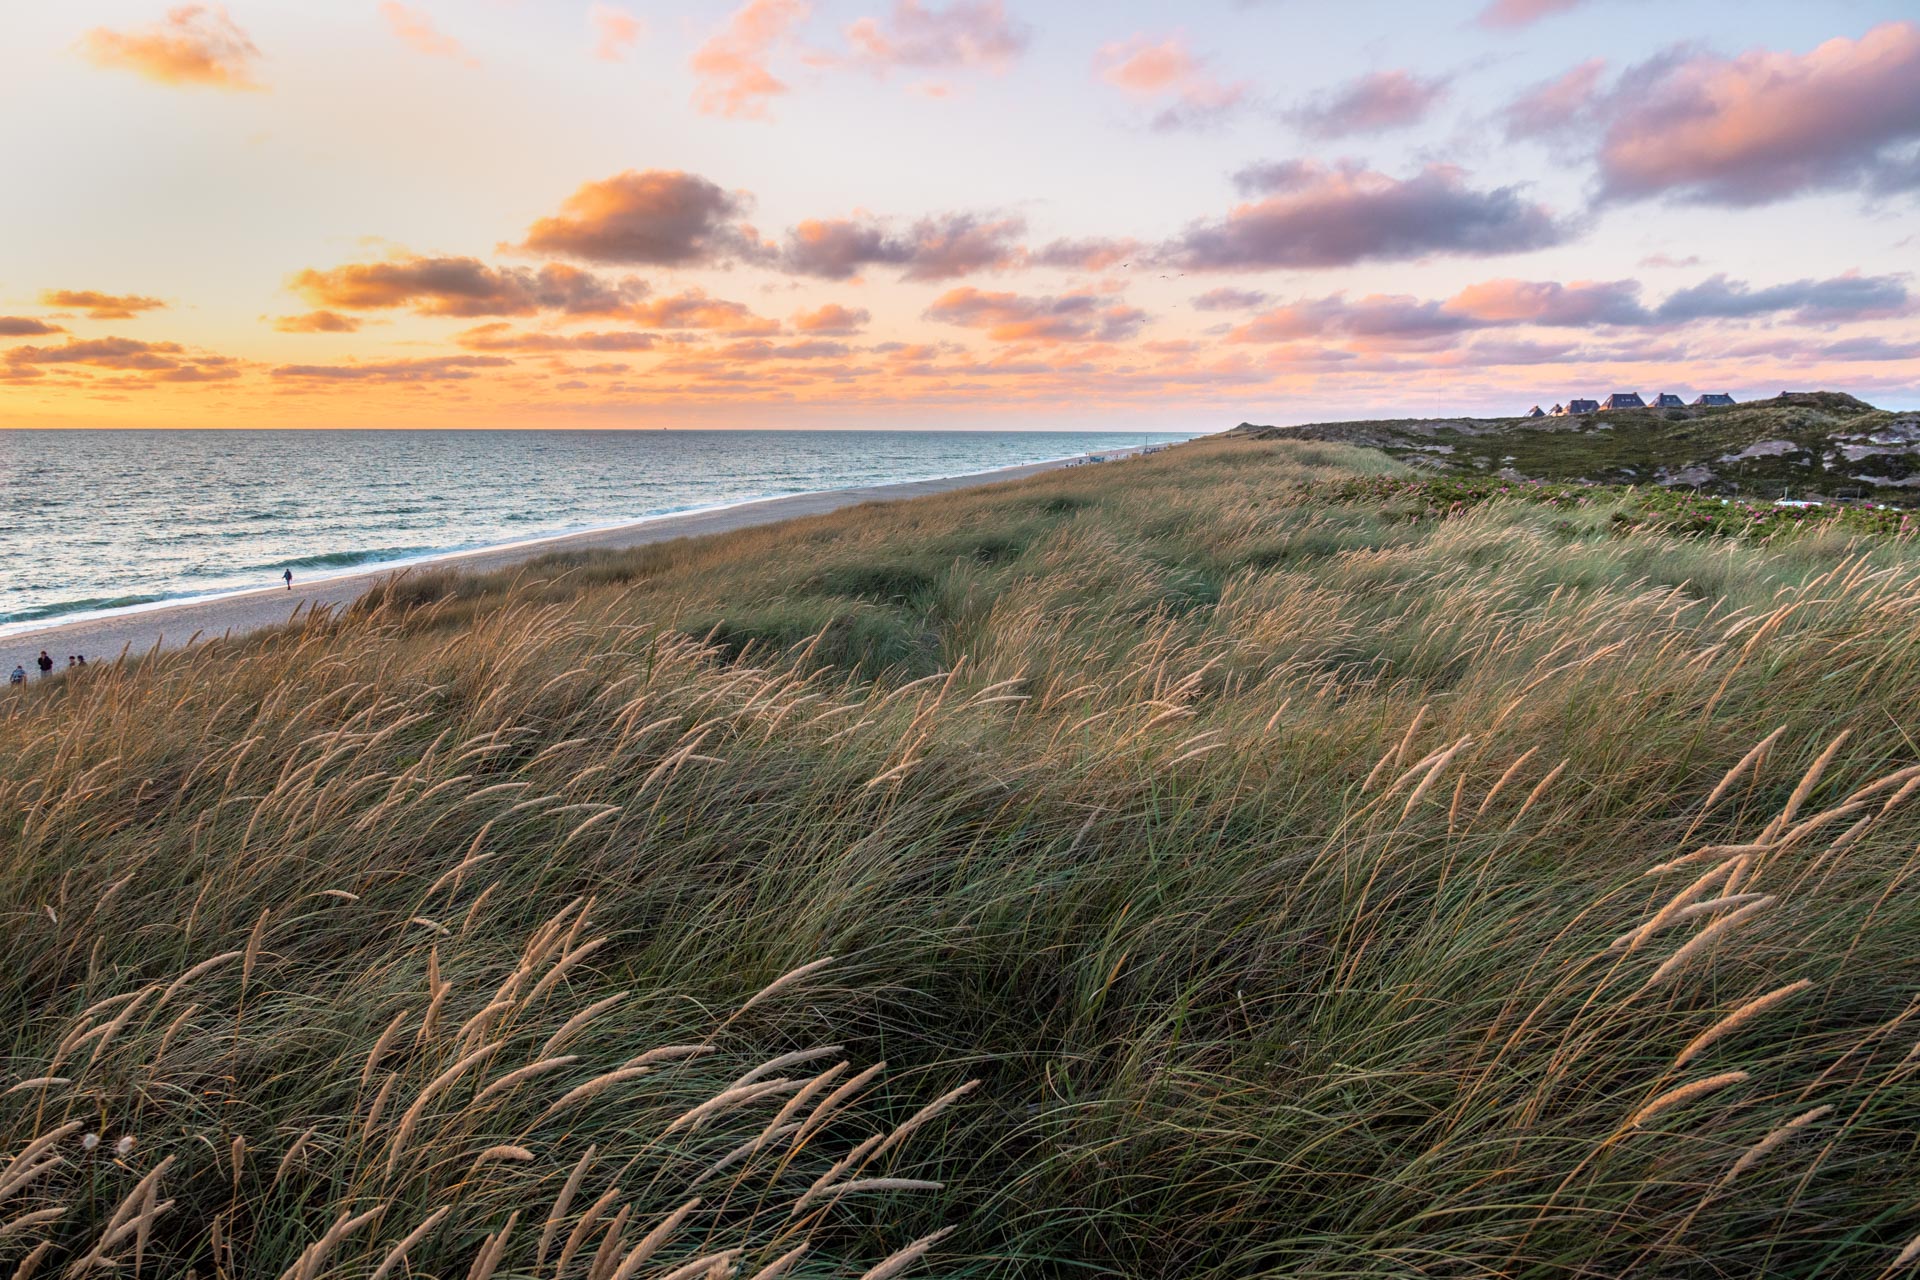 Sylt Travel Guide: 12 Best Things To Do & See on Germany’s Most Famous Island